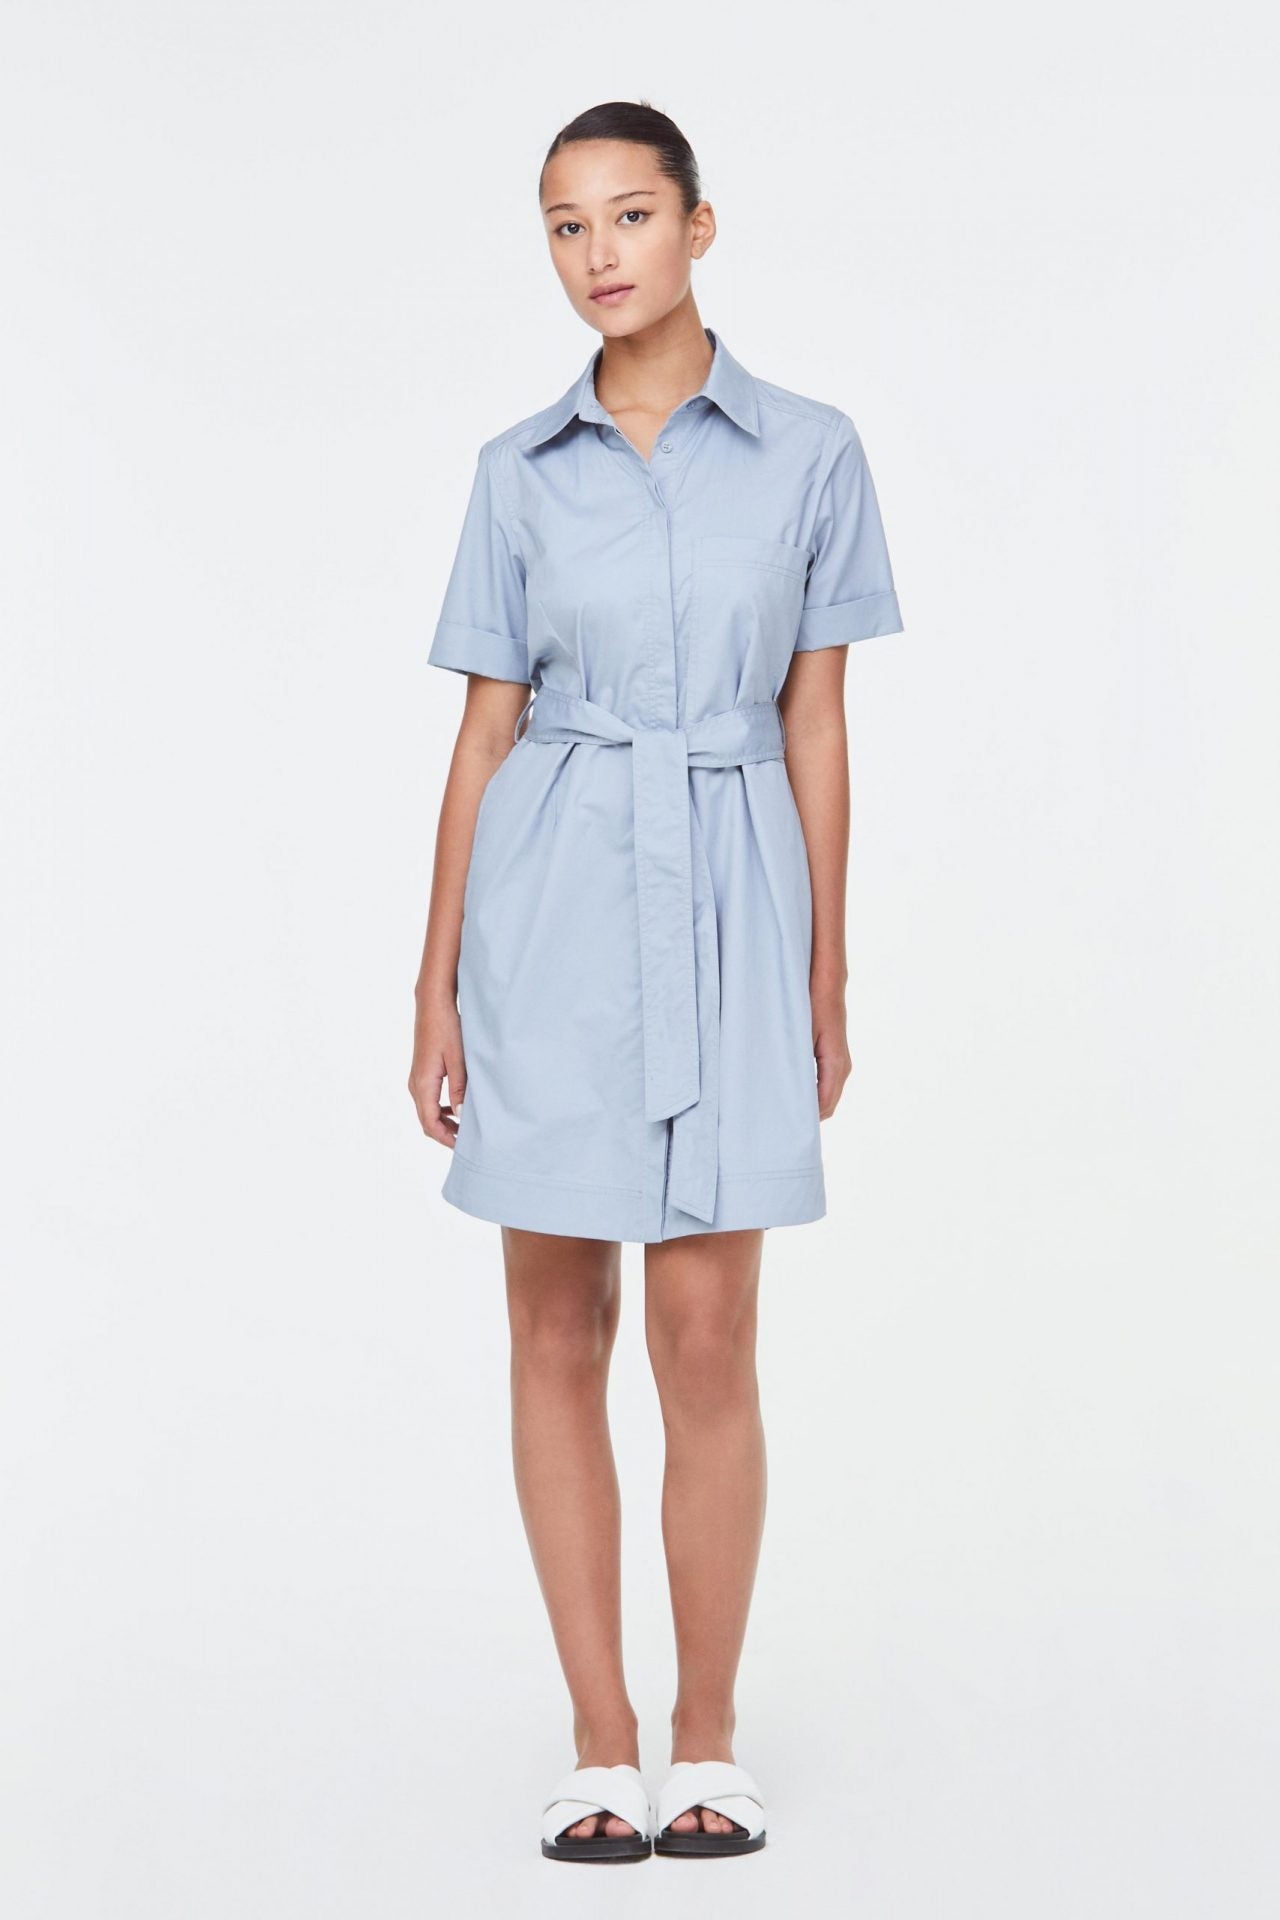 10480-Top-Stitched-A-Linen-Dress-Grey-Blue-A-scaled